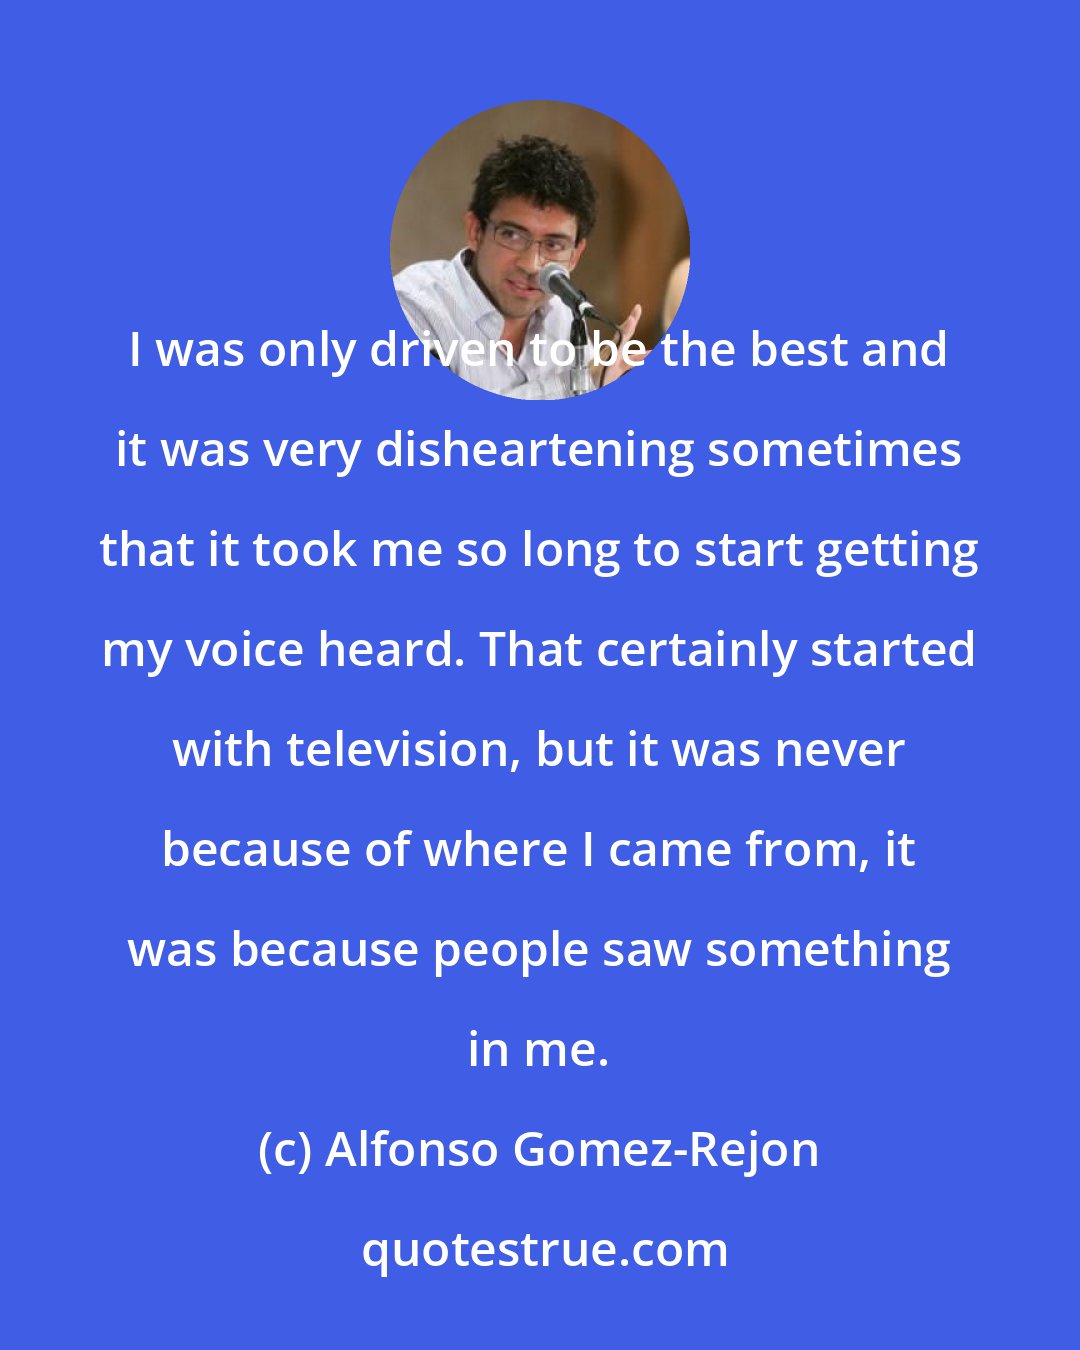 Alfonso Gomez-Rejon: I was only driven to be the best and it was very disheartening sometimes that it took me so long to start getting my voice heard. That certainly started with television, but it was never because of where I came from, it was because people saw something in me.